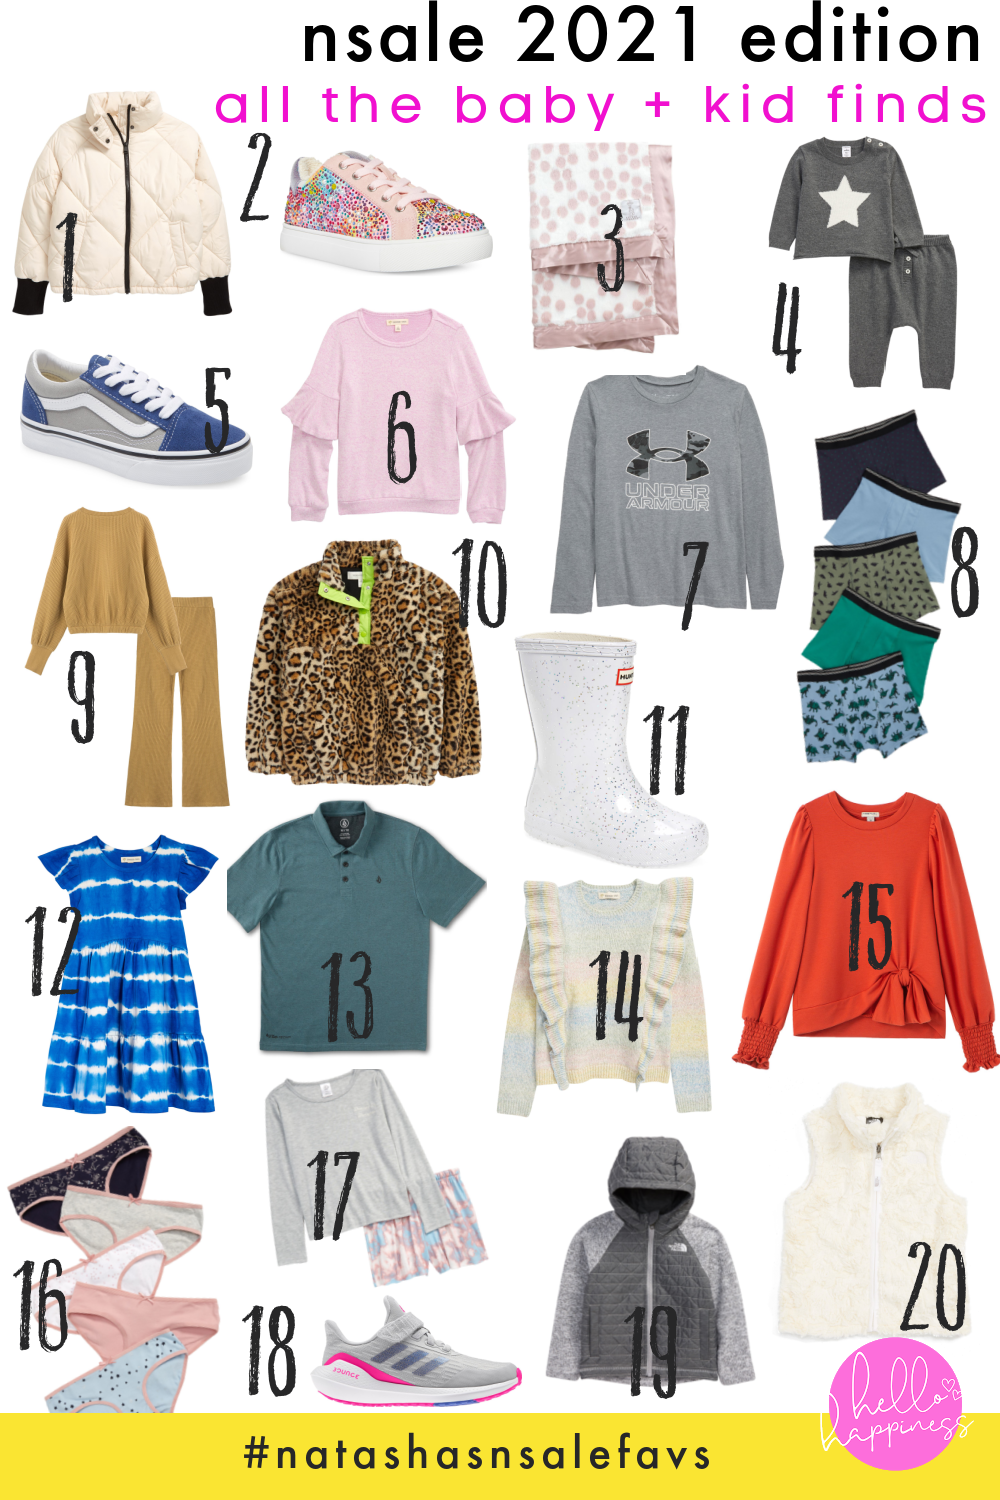 Nordstrom Anniversary Sale by popular Nashville fashion blog, Hello Happiness: collage image of hunter rain boot, tie dye dress, sweater loungewear set, leopard print fleece jacket, boxer set, fleece blanket, vans sneakers, quilted jacket, under armor shirt, ruffle sweater, polo shirt, glitter sneakers, faux fur vest, Adidas sneakers, underwear set, north face jacket, and pajama set. 